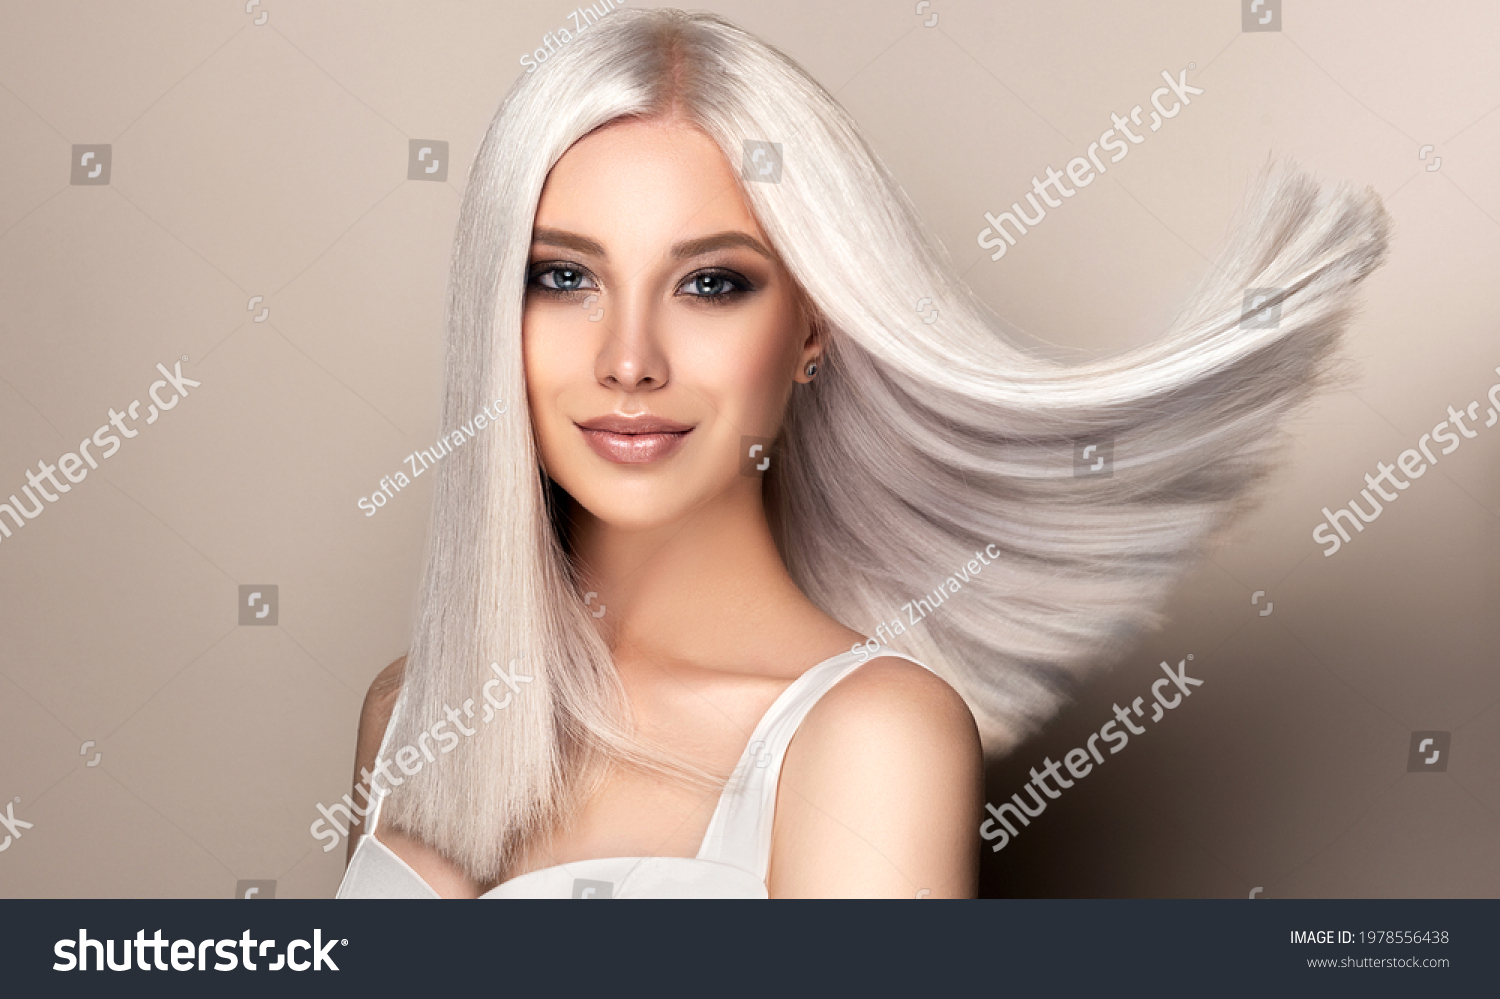 Beautiful girl with hair coloring in ultra blond. Stylish hairstyle done in a beauty salon. Fashion, cosmetics and makeup #1978556438